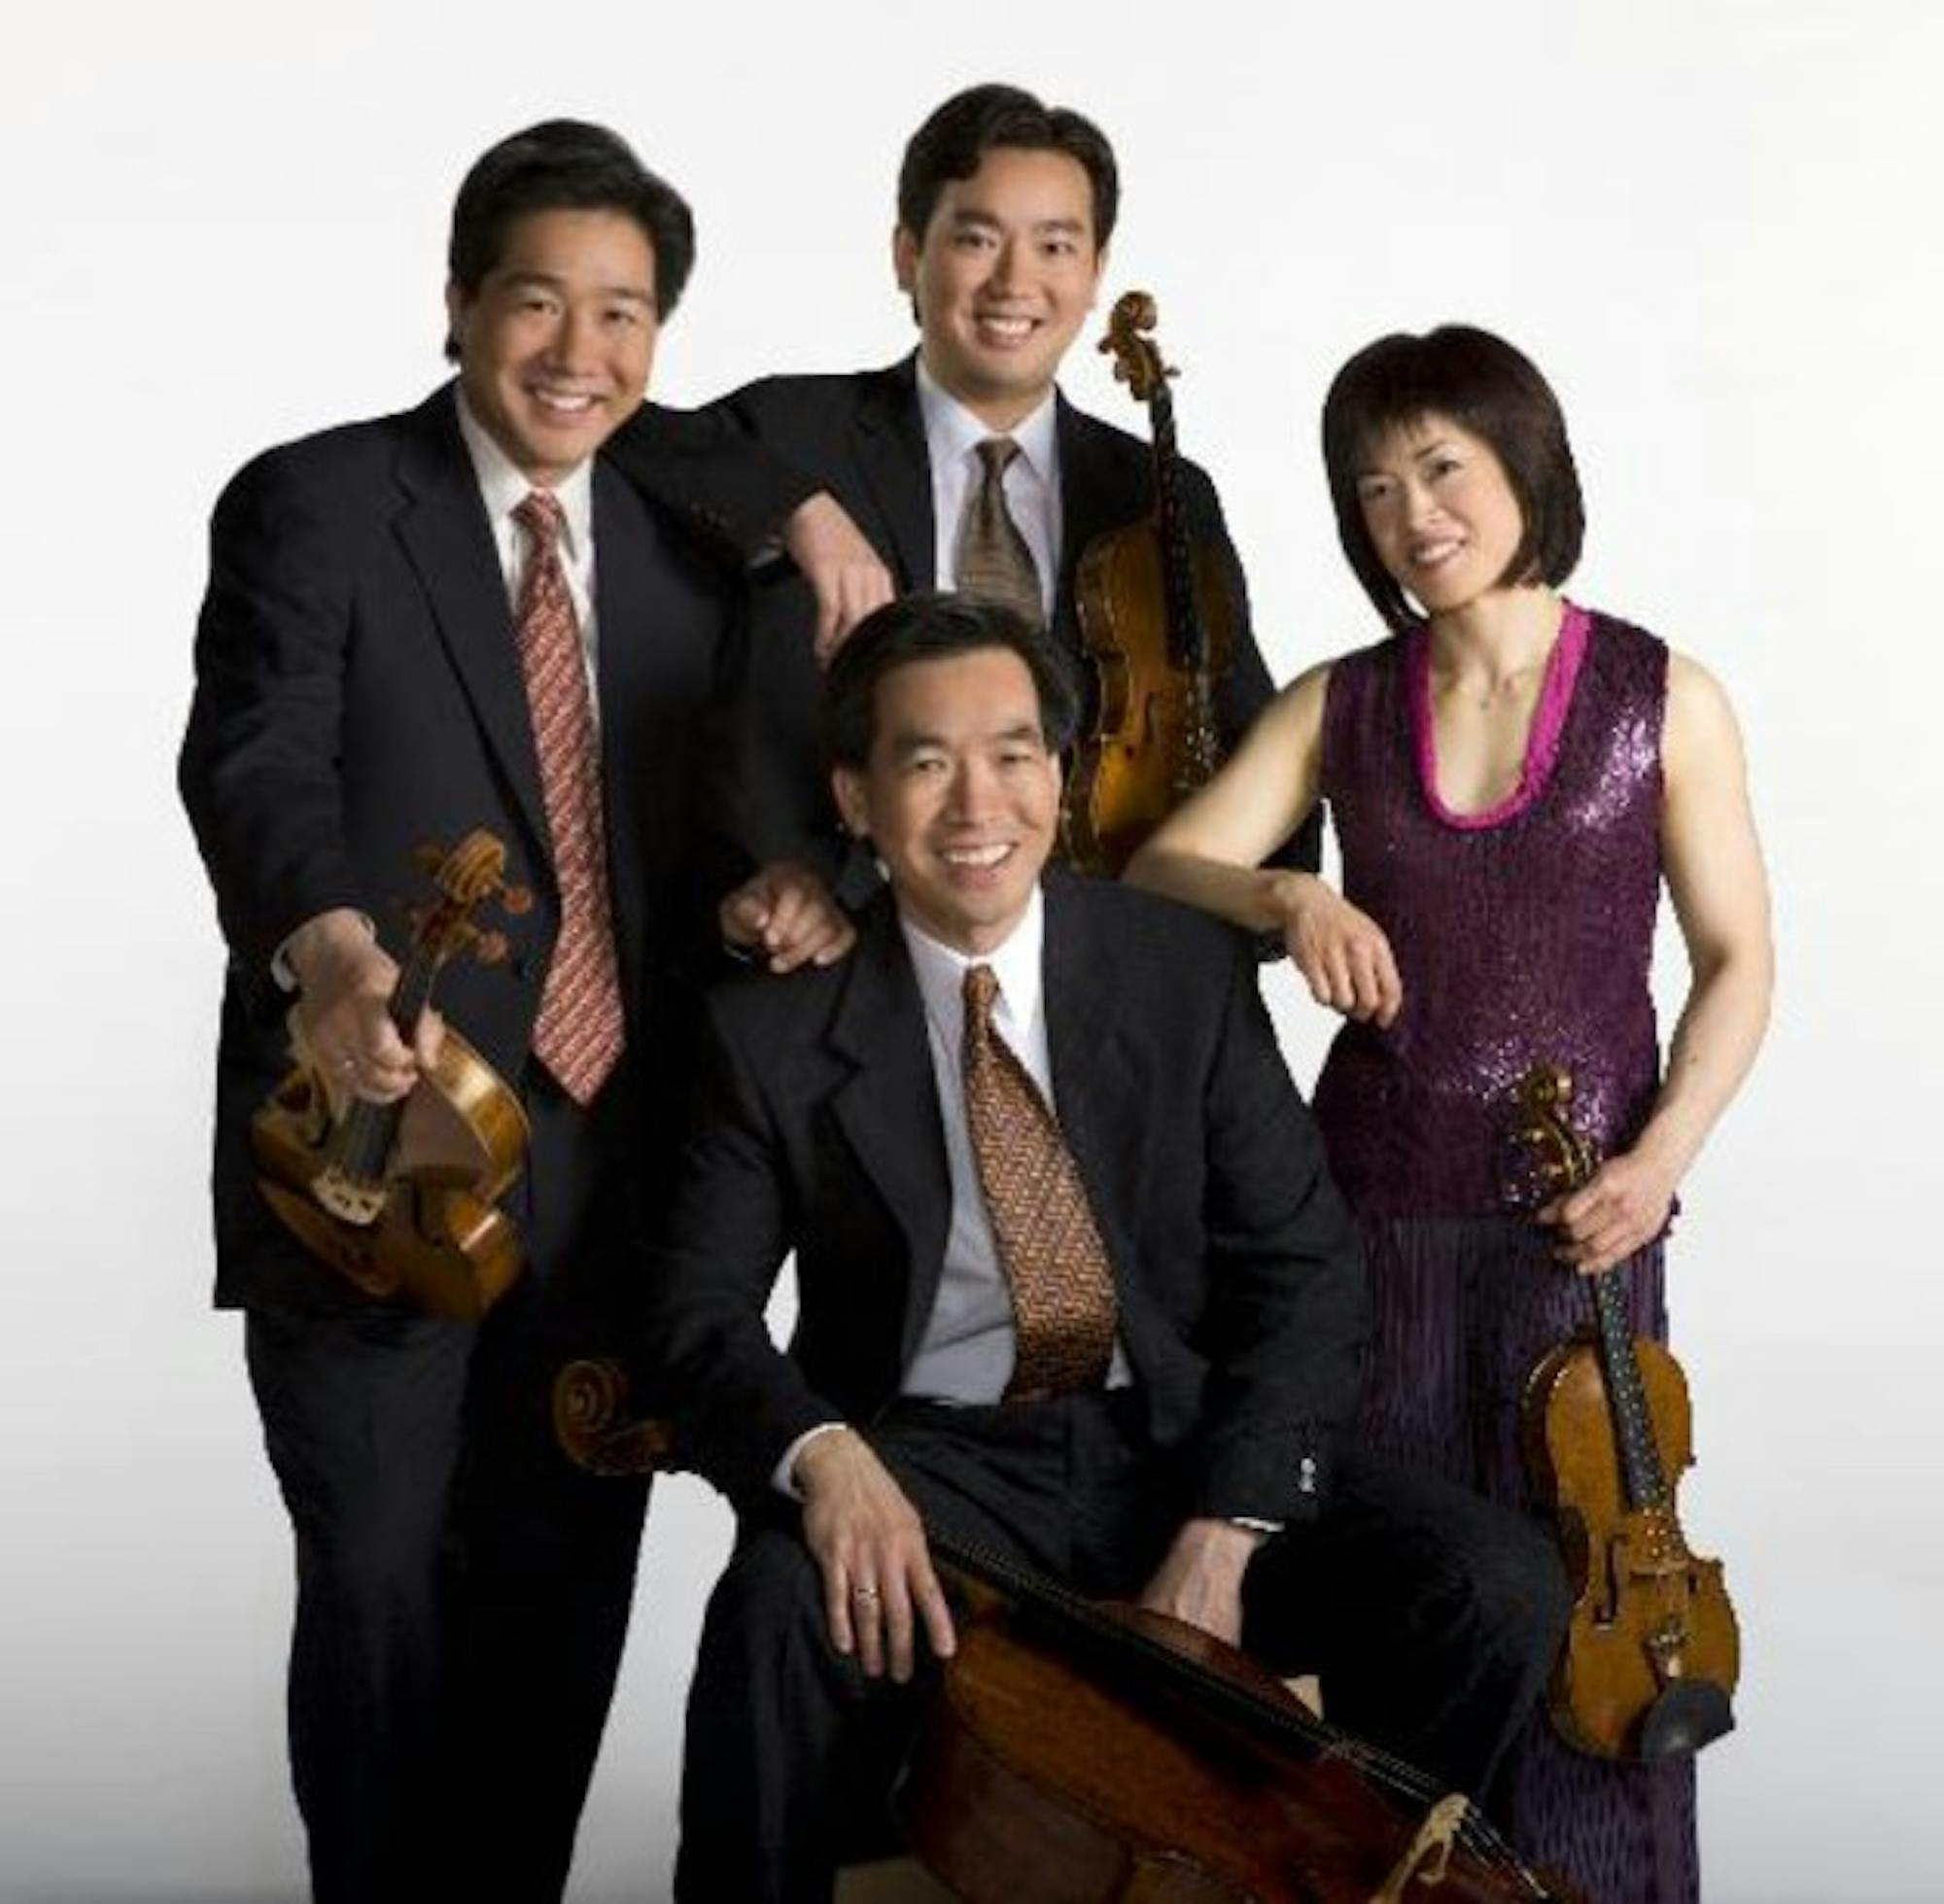 The award-winning Ying Quartet will perform in the Hopkins Center on Friday.